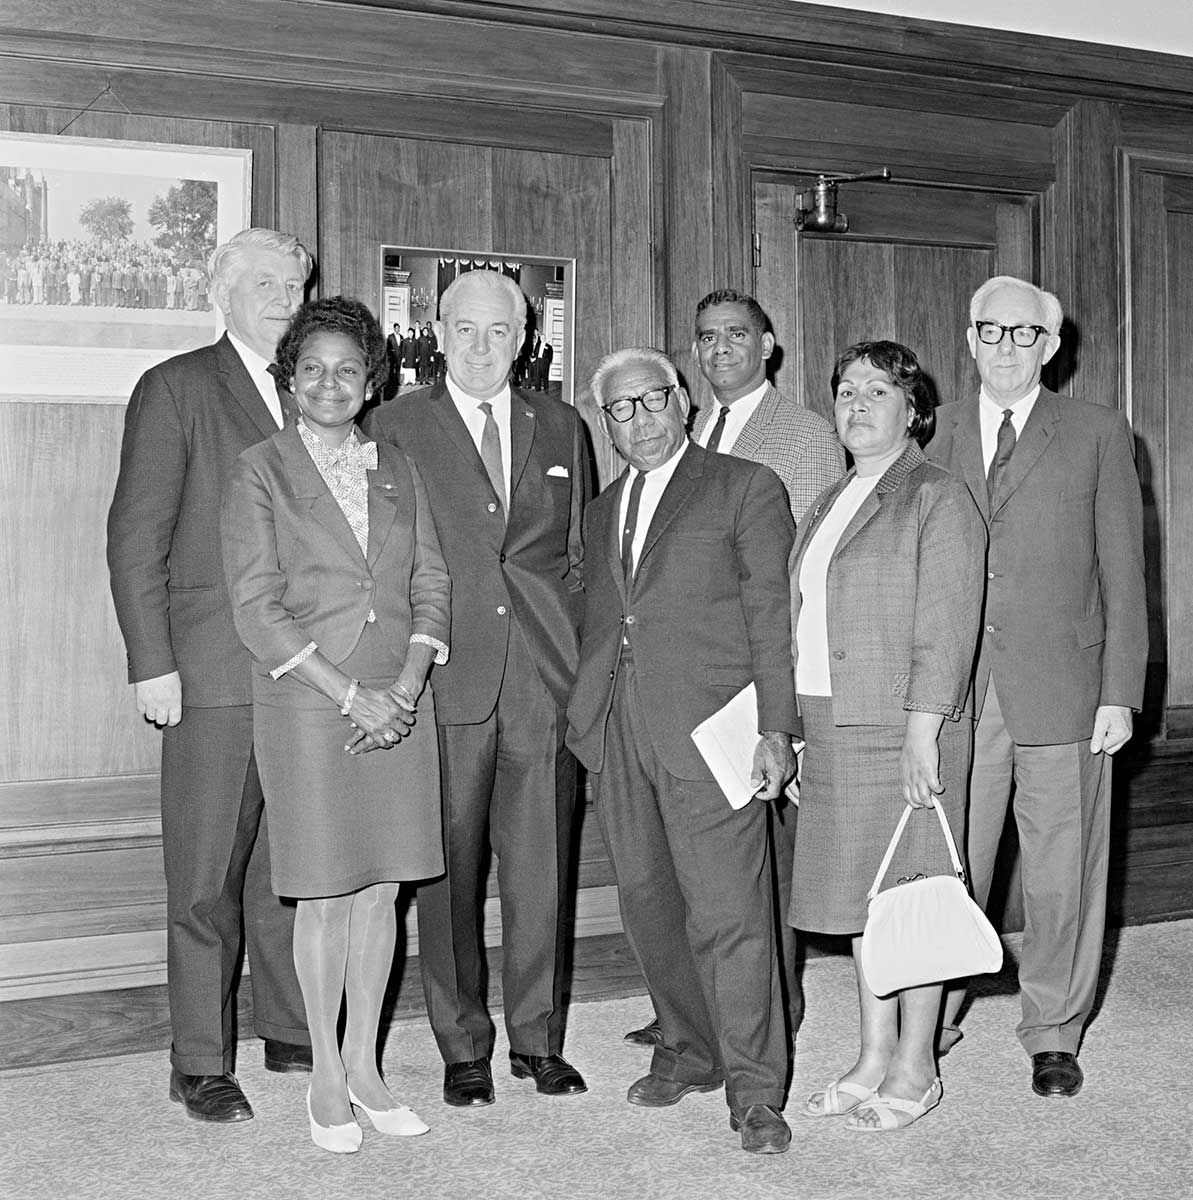 The seven people named stand in front of a wood-panelled wall in what looks like Old Parliament House.